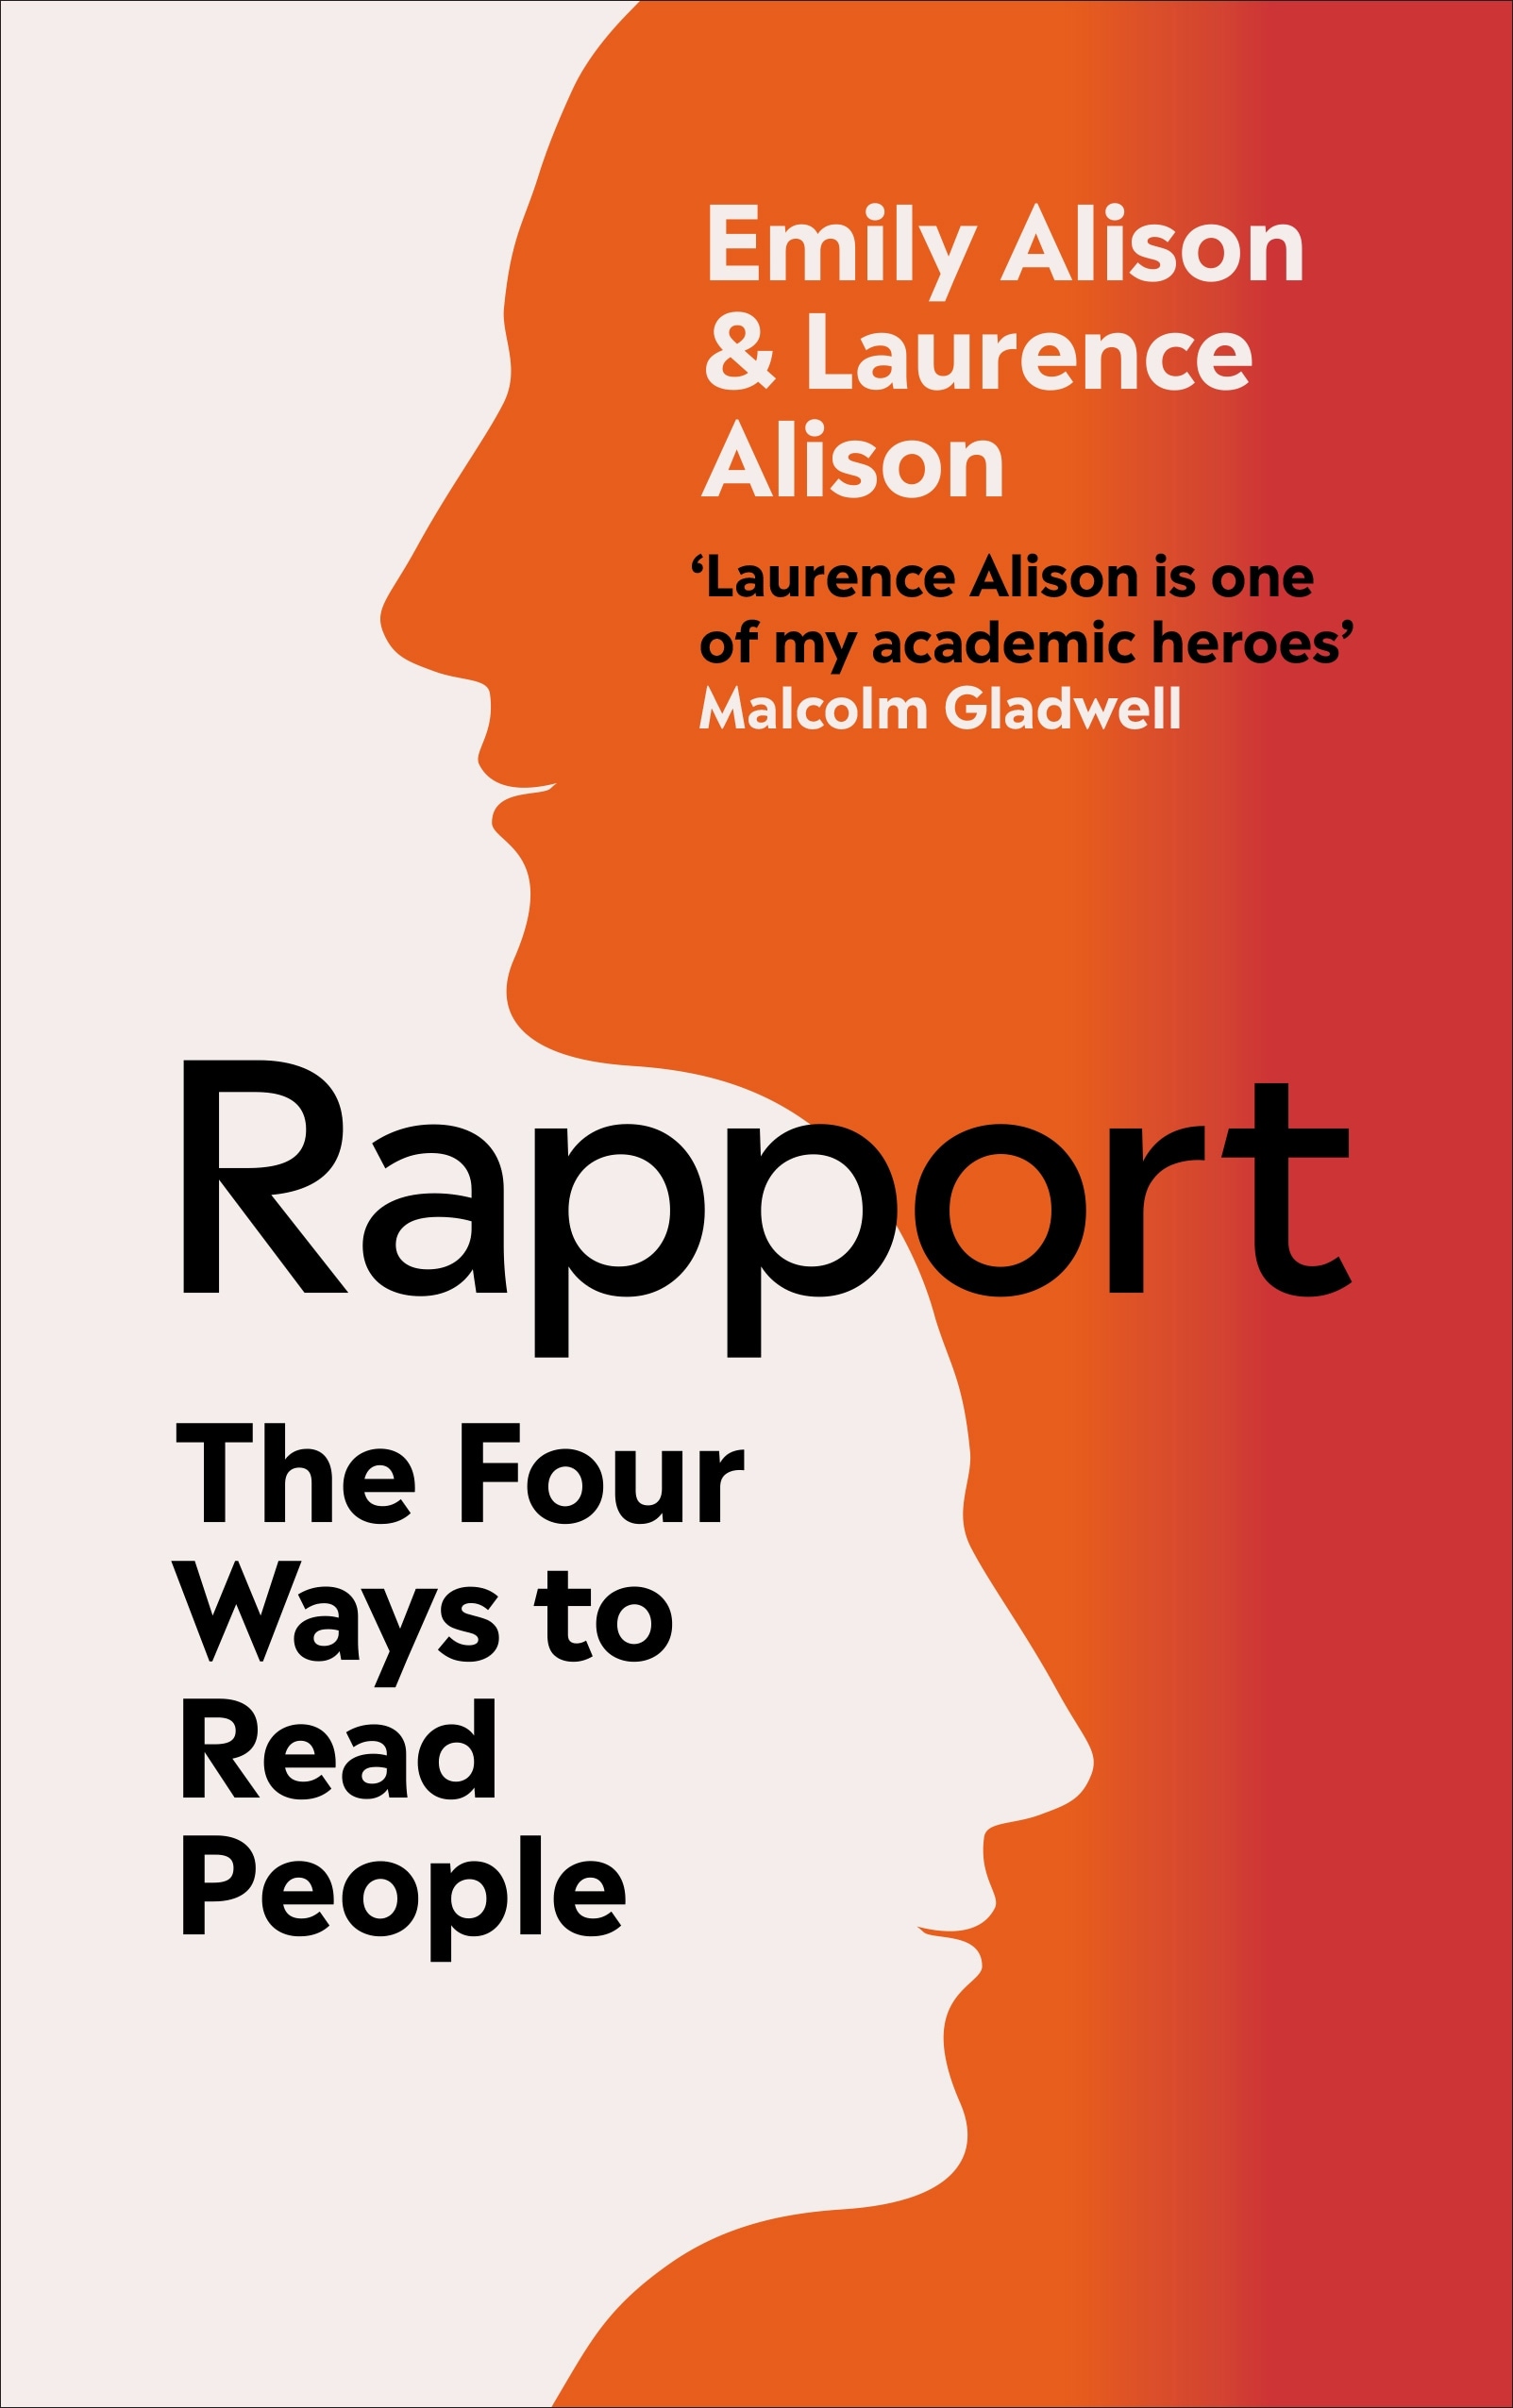 Book “Rapport” by Emily Alison, Laurence Alison — July 30, 2020